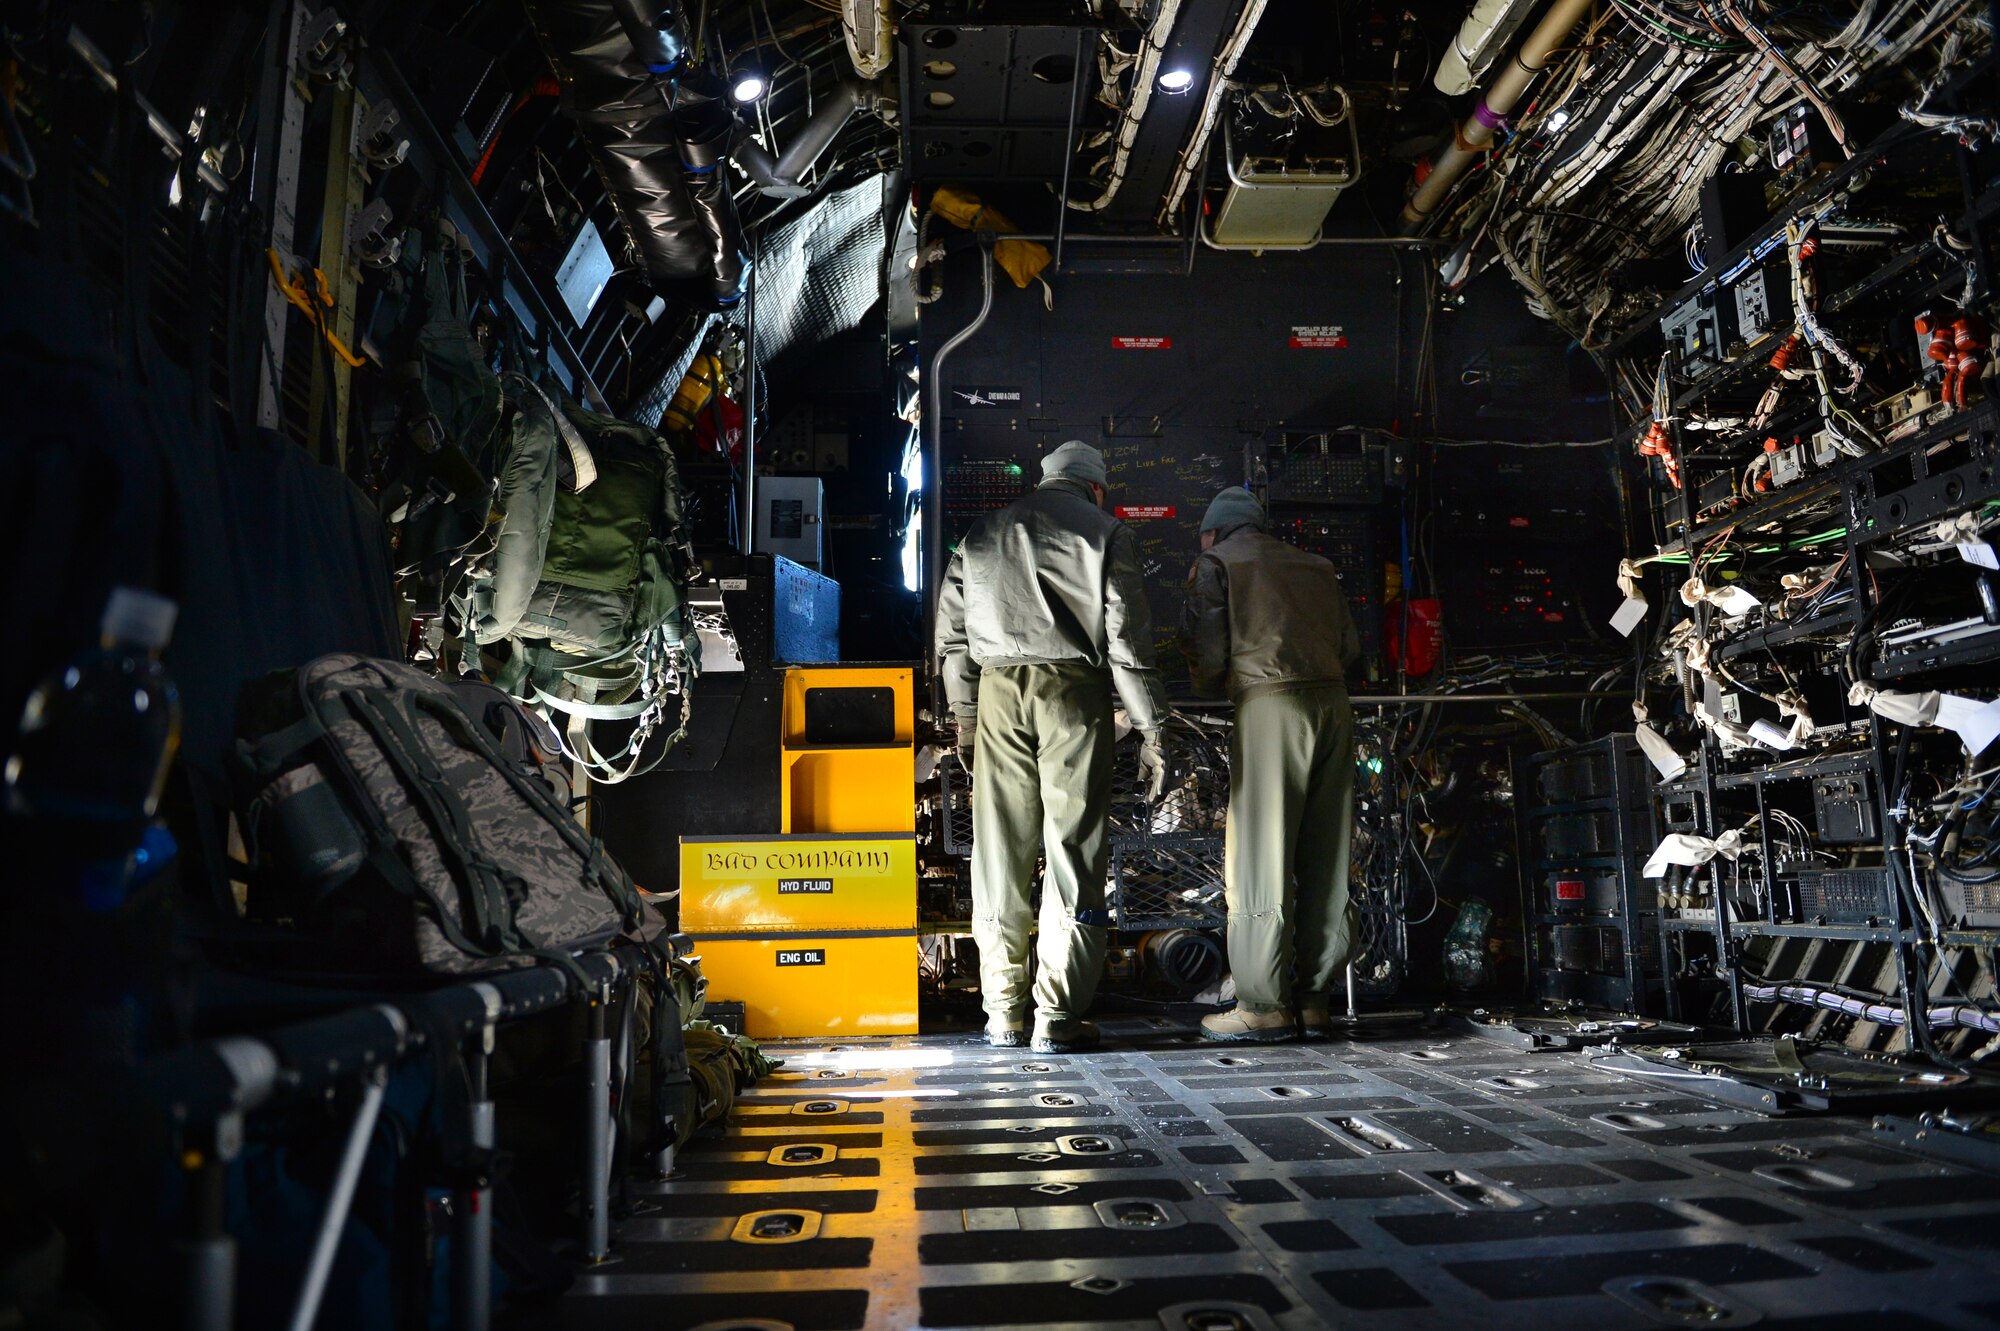 Two aircrew members with the 16th Special Operations Squadron review flight plans aboard the AC-130H Spectre gunship "Bad Company" at Cannon Air Force Base, N.M., Feb. 7, 2014. Built in 1969, Bad Company is the first of six Spectre gunships scheduled to make the trip to Davis-Monthan Air Force Base, Ariz. (U.S. Air Force photo/ Senior Airman Eboni Reece)
